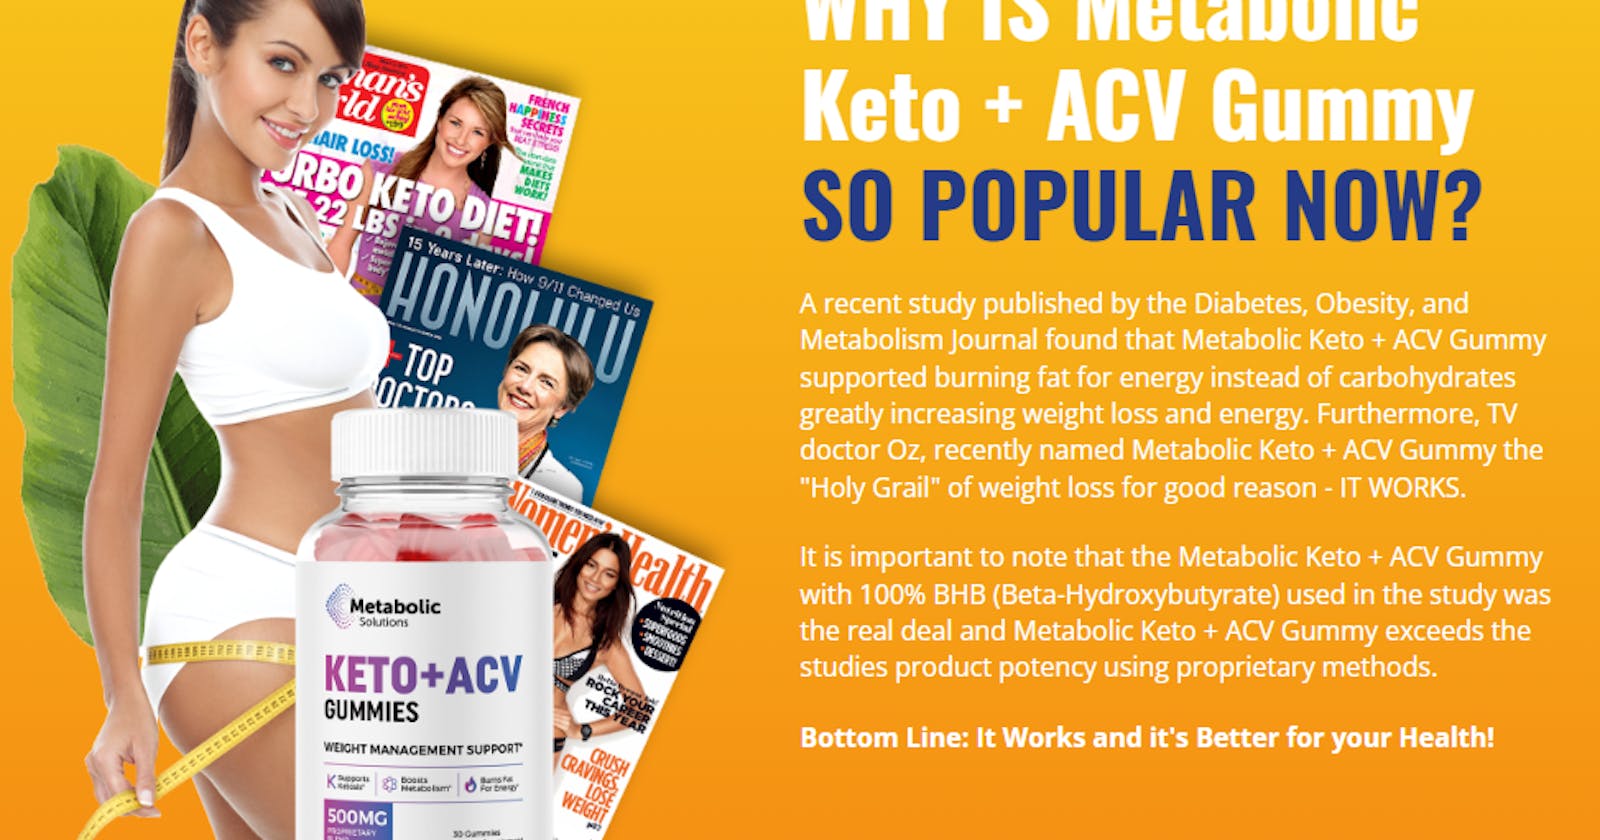 Metabolic Labs Keto ACV Gummies #1 Wеight Loss Pills - 90% Off Today Official Deal?